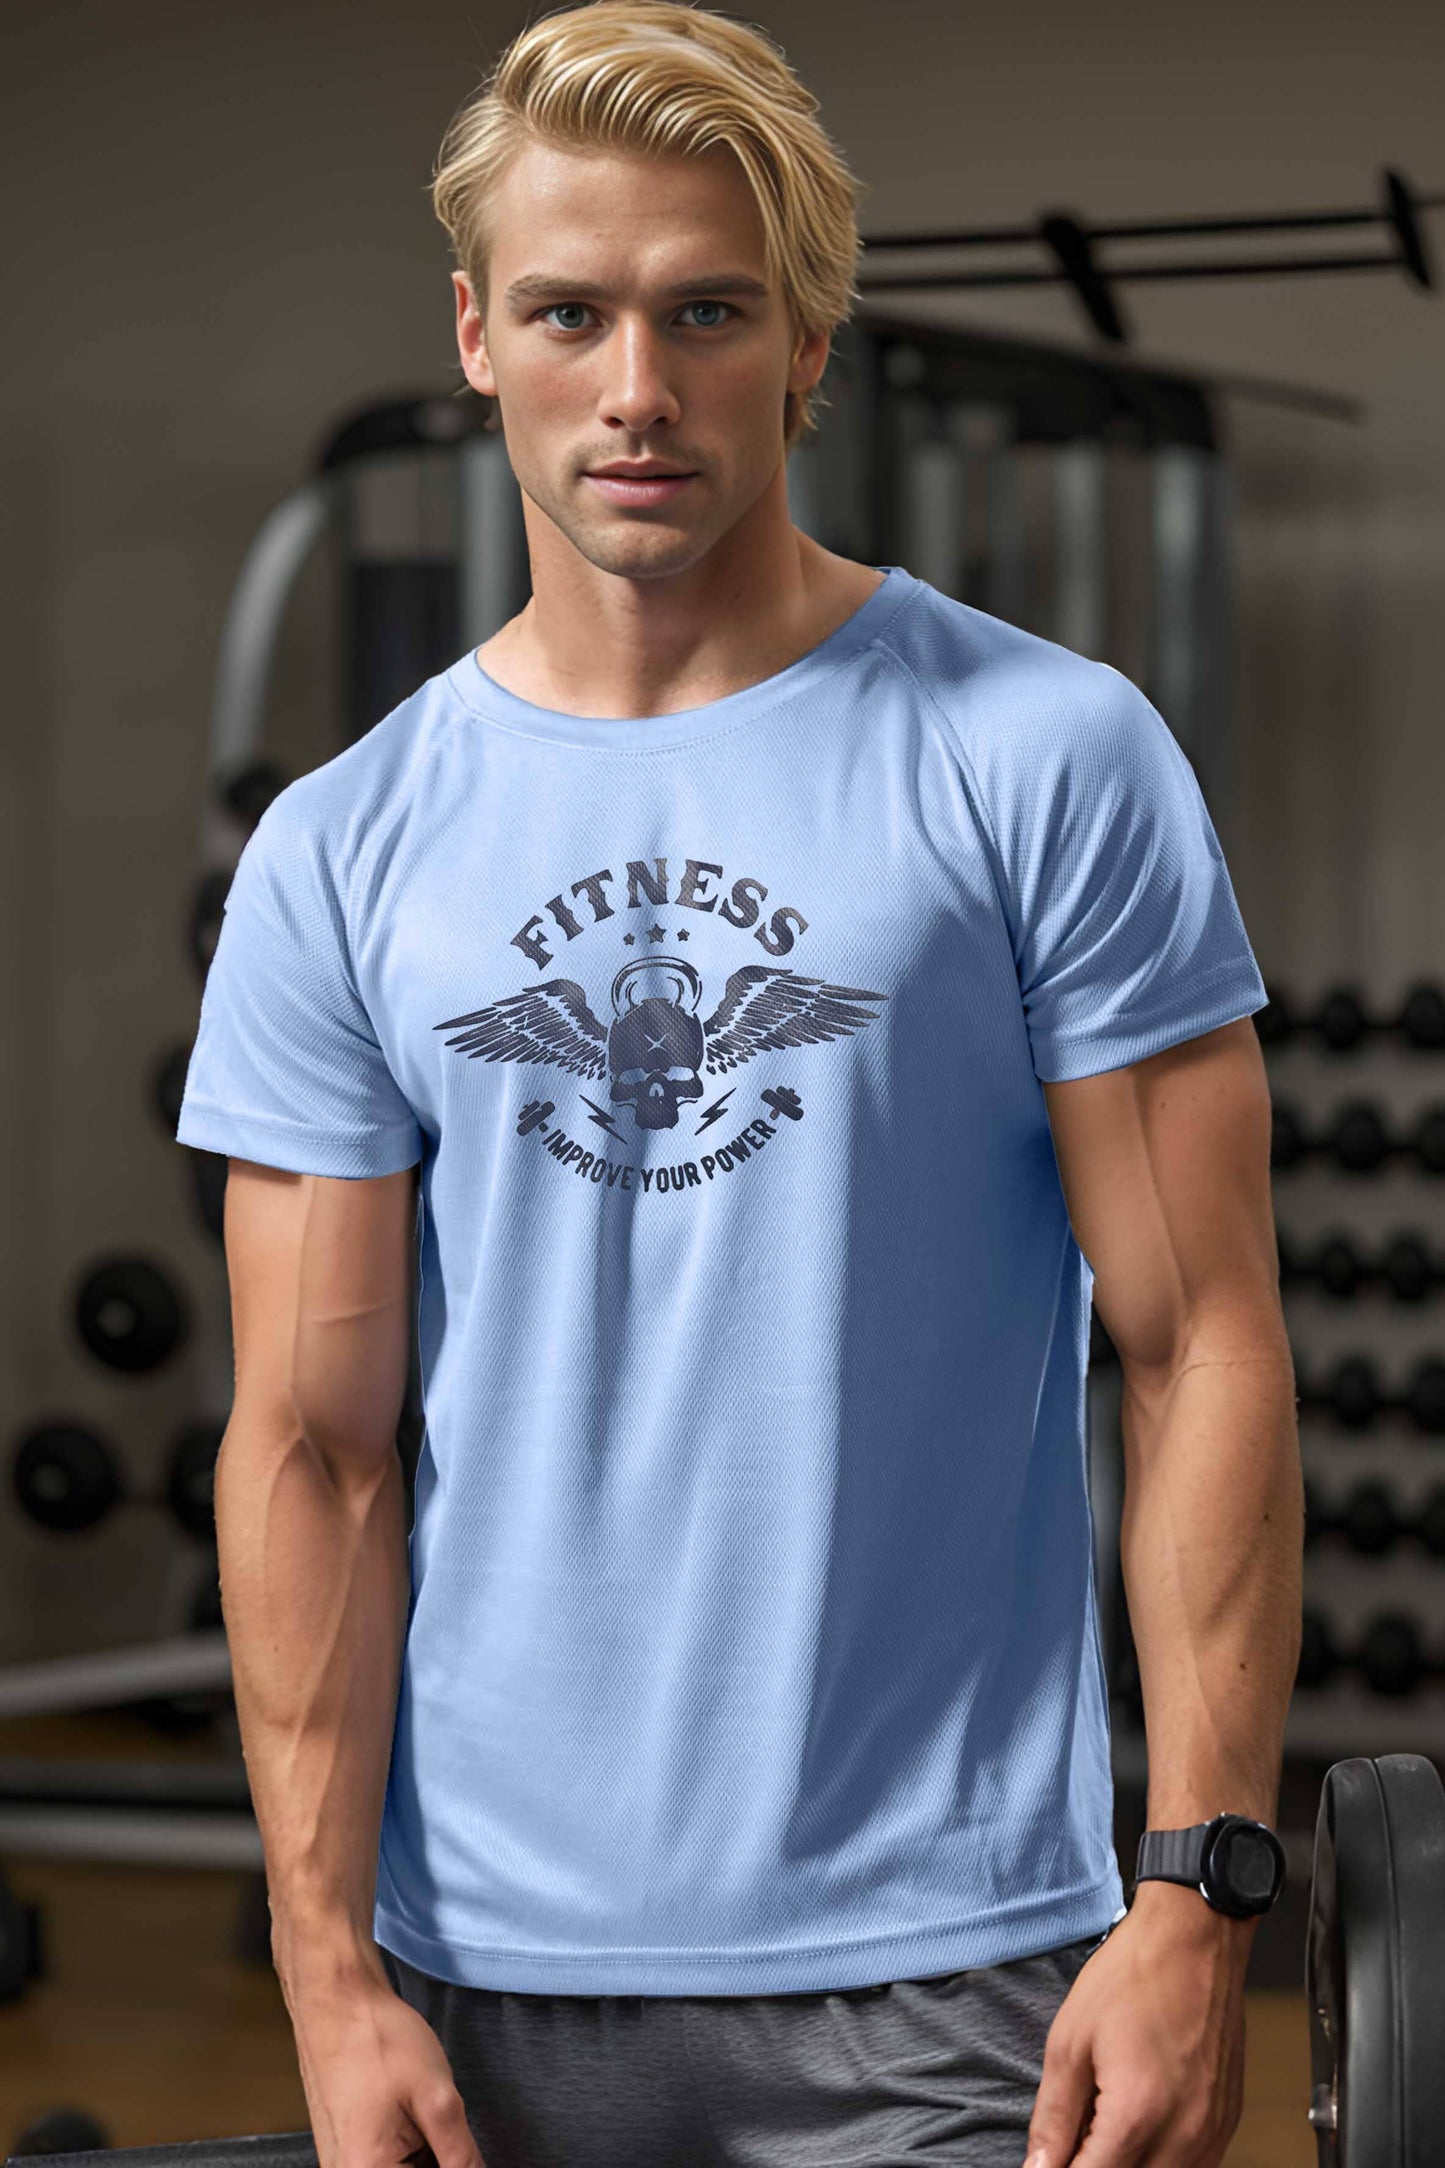 Polo Republica Men's Fitness Power Printed Activewear Tee Shirt